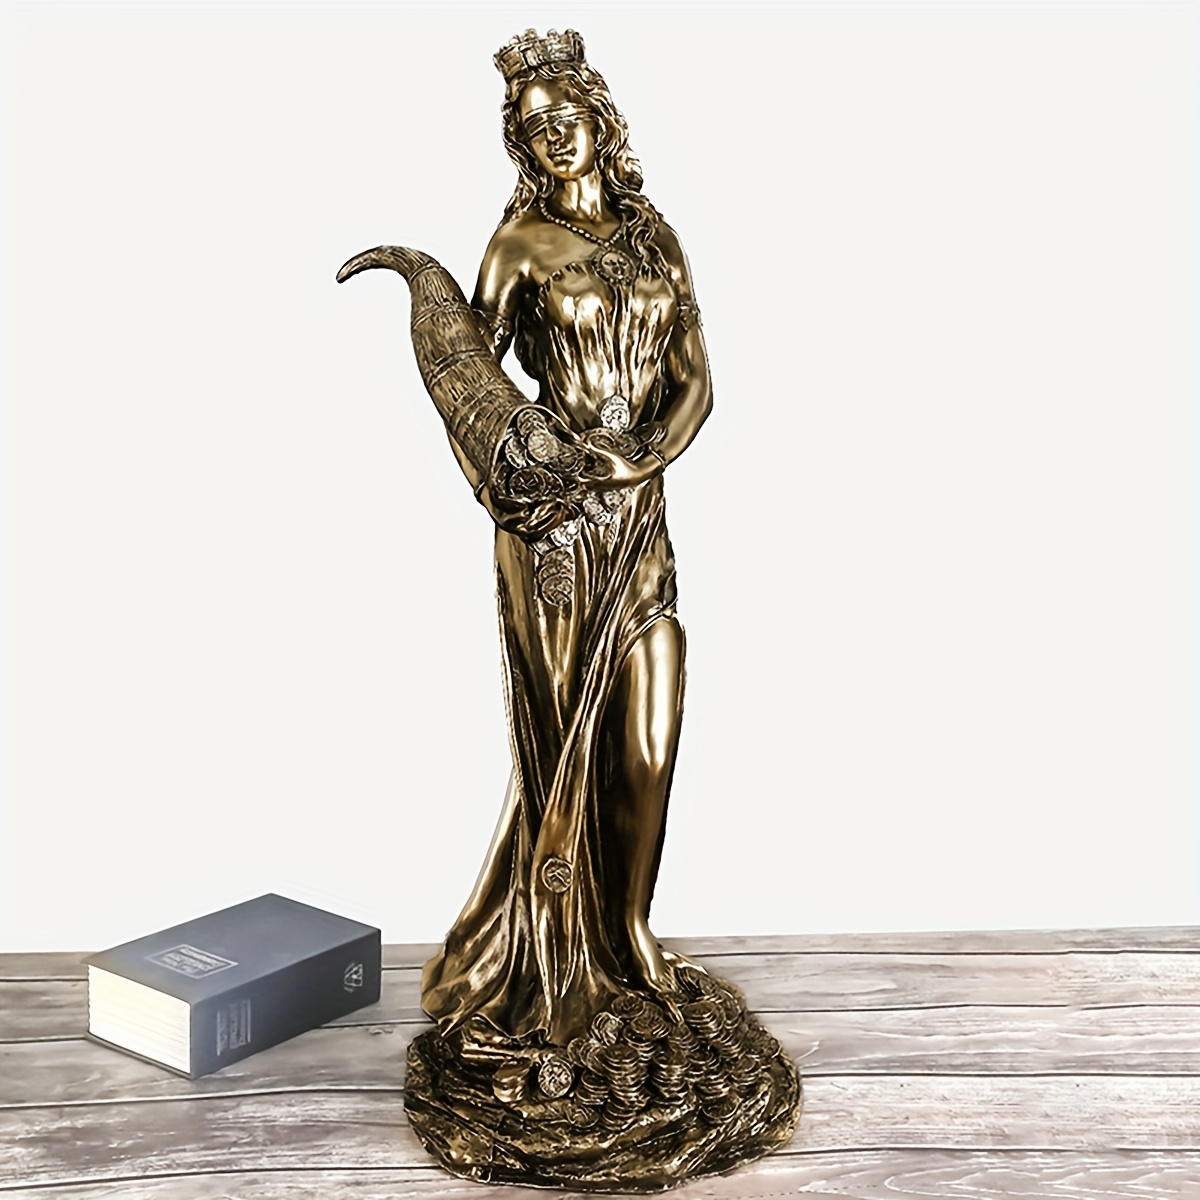 

Greek Goddess Of Wealth Statue - 8.5" Resin Sculpture For Prosperity & Good Fortune, Perfect For Home Office Decor Statues For Home Decor Statue Decor